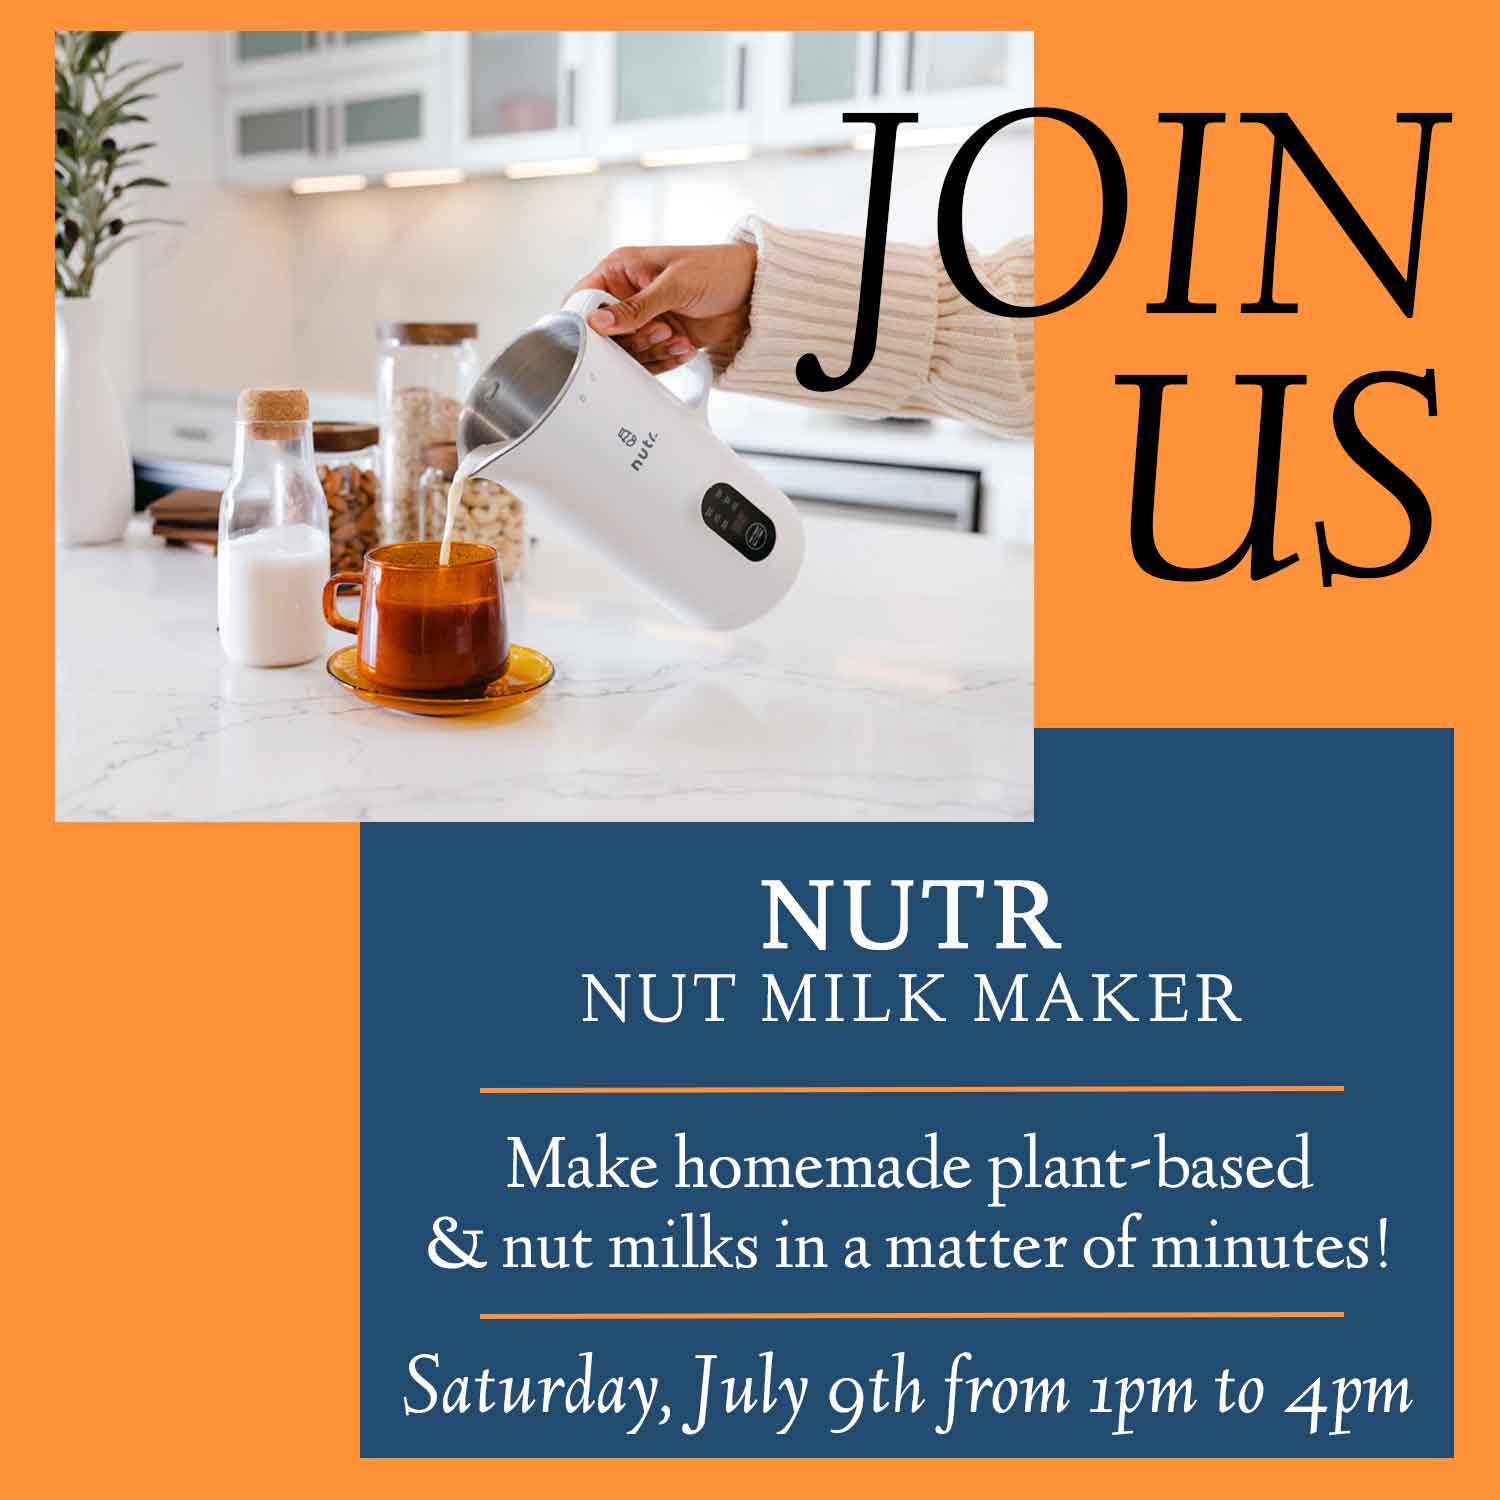 Let's make NUT MILK! Join us Saturday, July 9th from 1pm to 4pm!